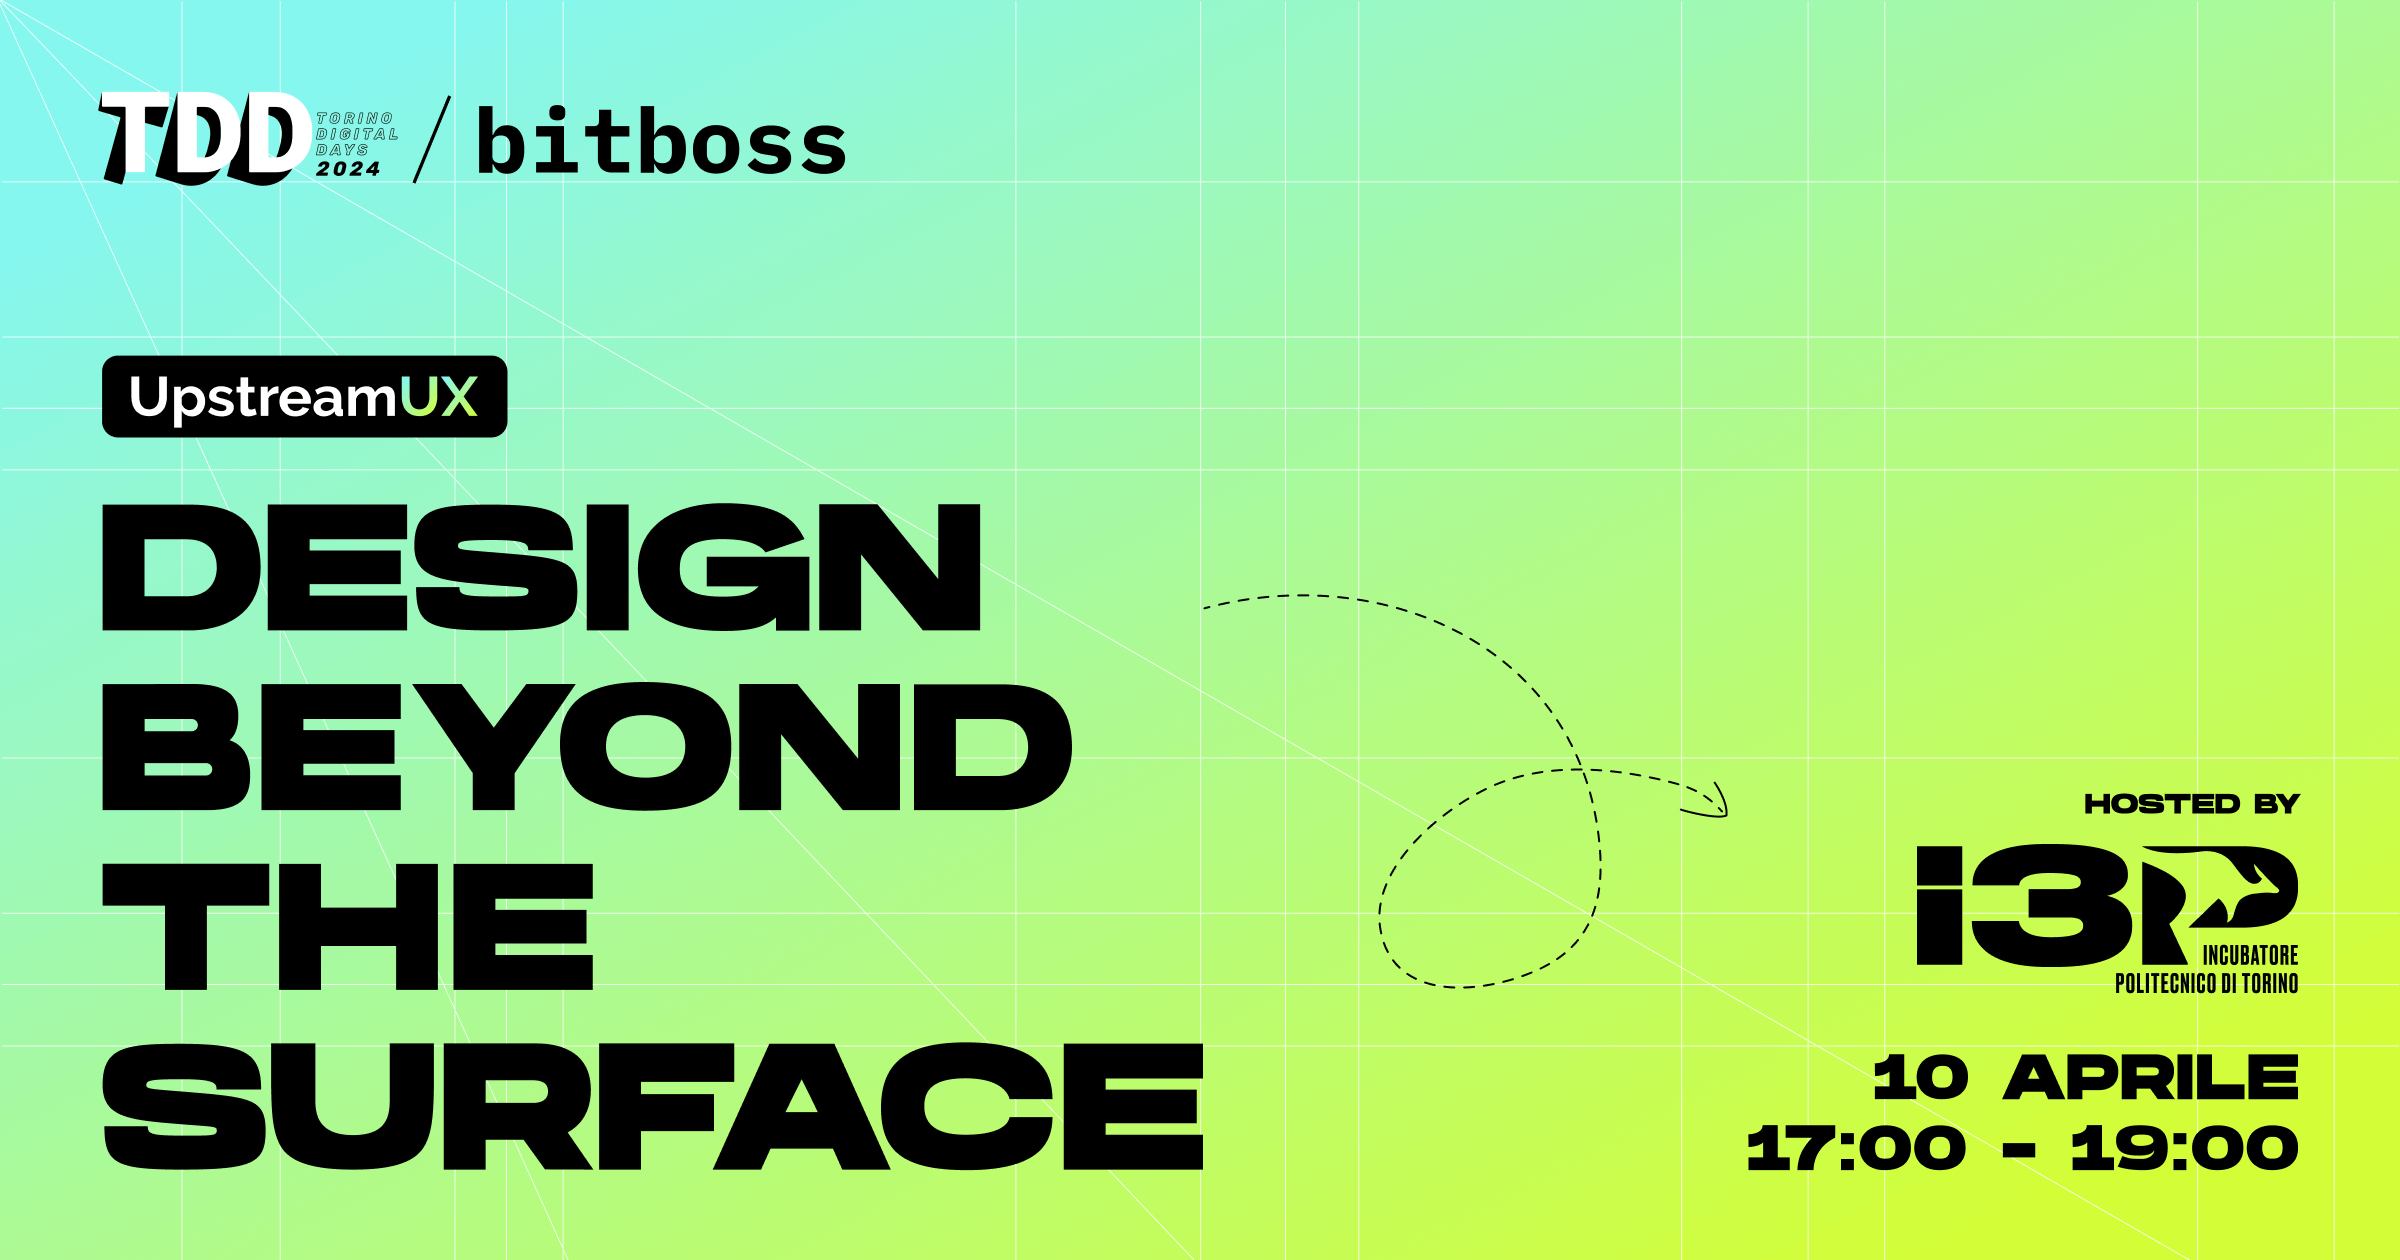 DESIGN BEYOND THE SURFACE